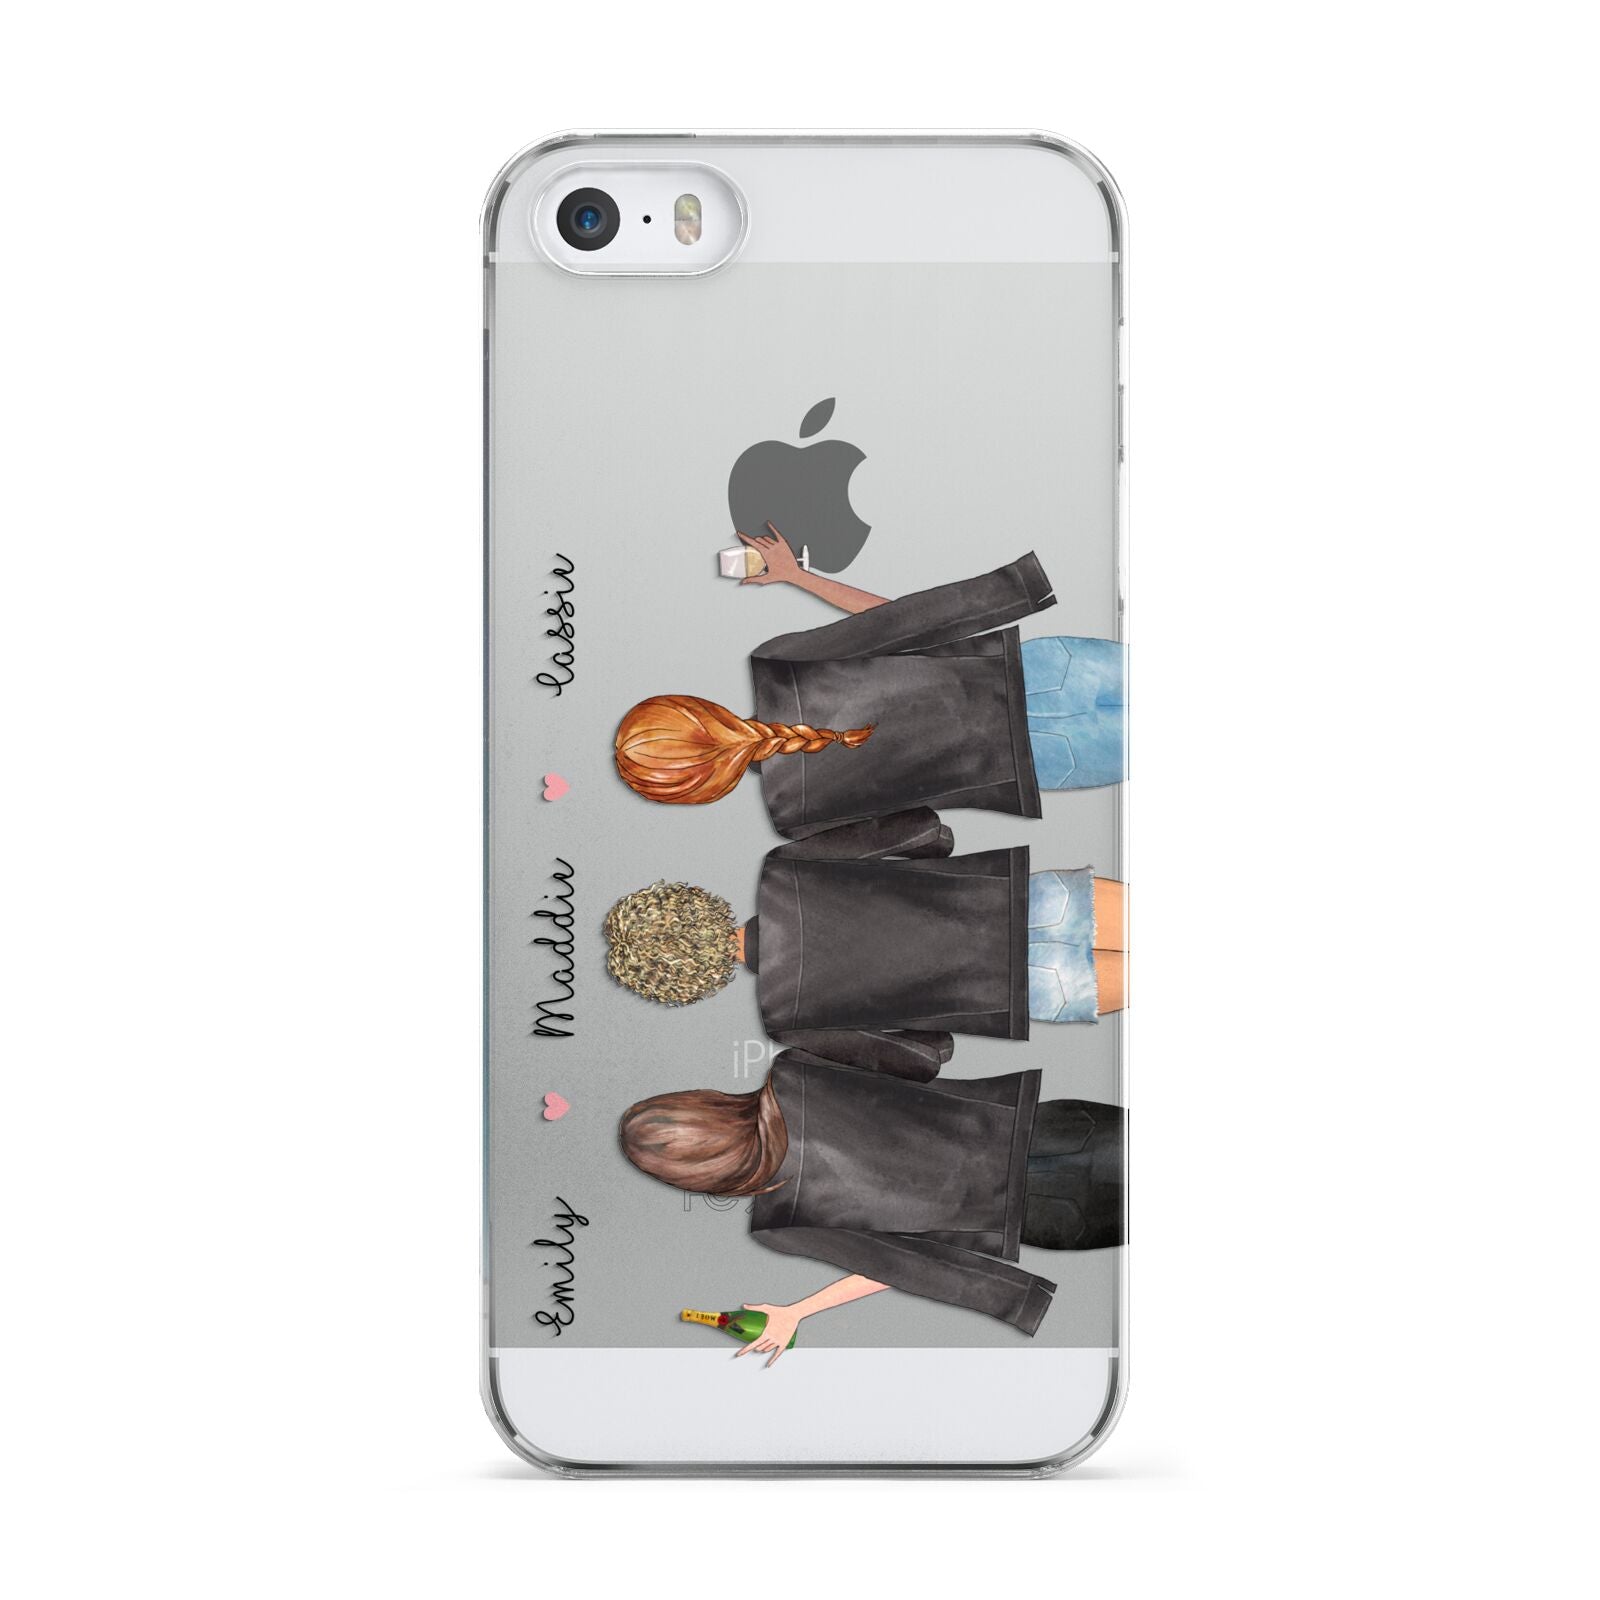 3 Best Friends with Names Apple iPhone 5 Case